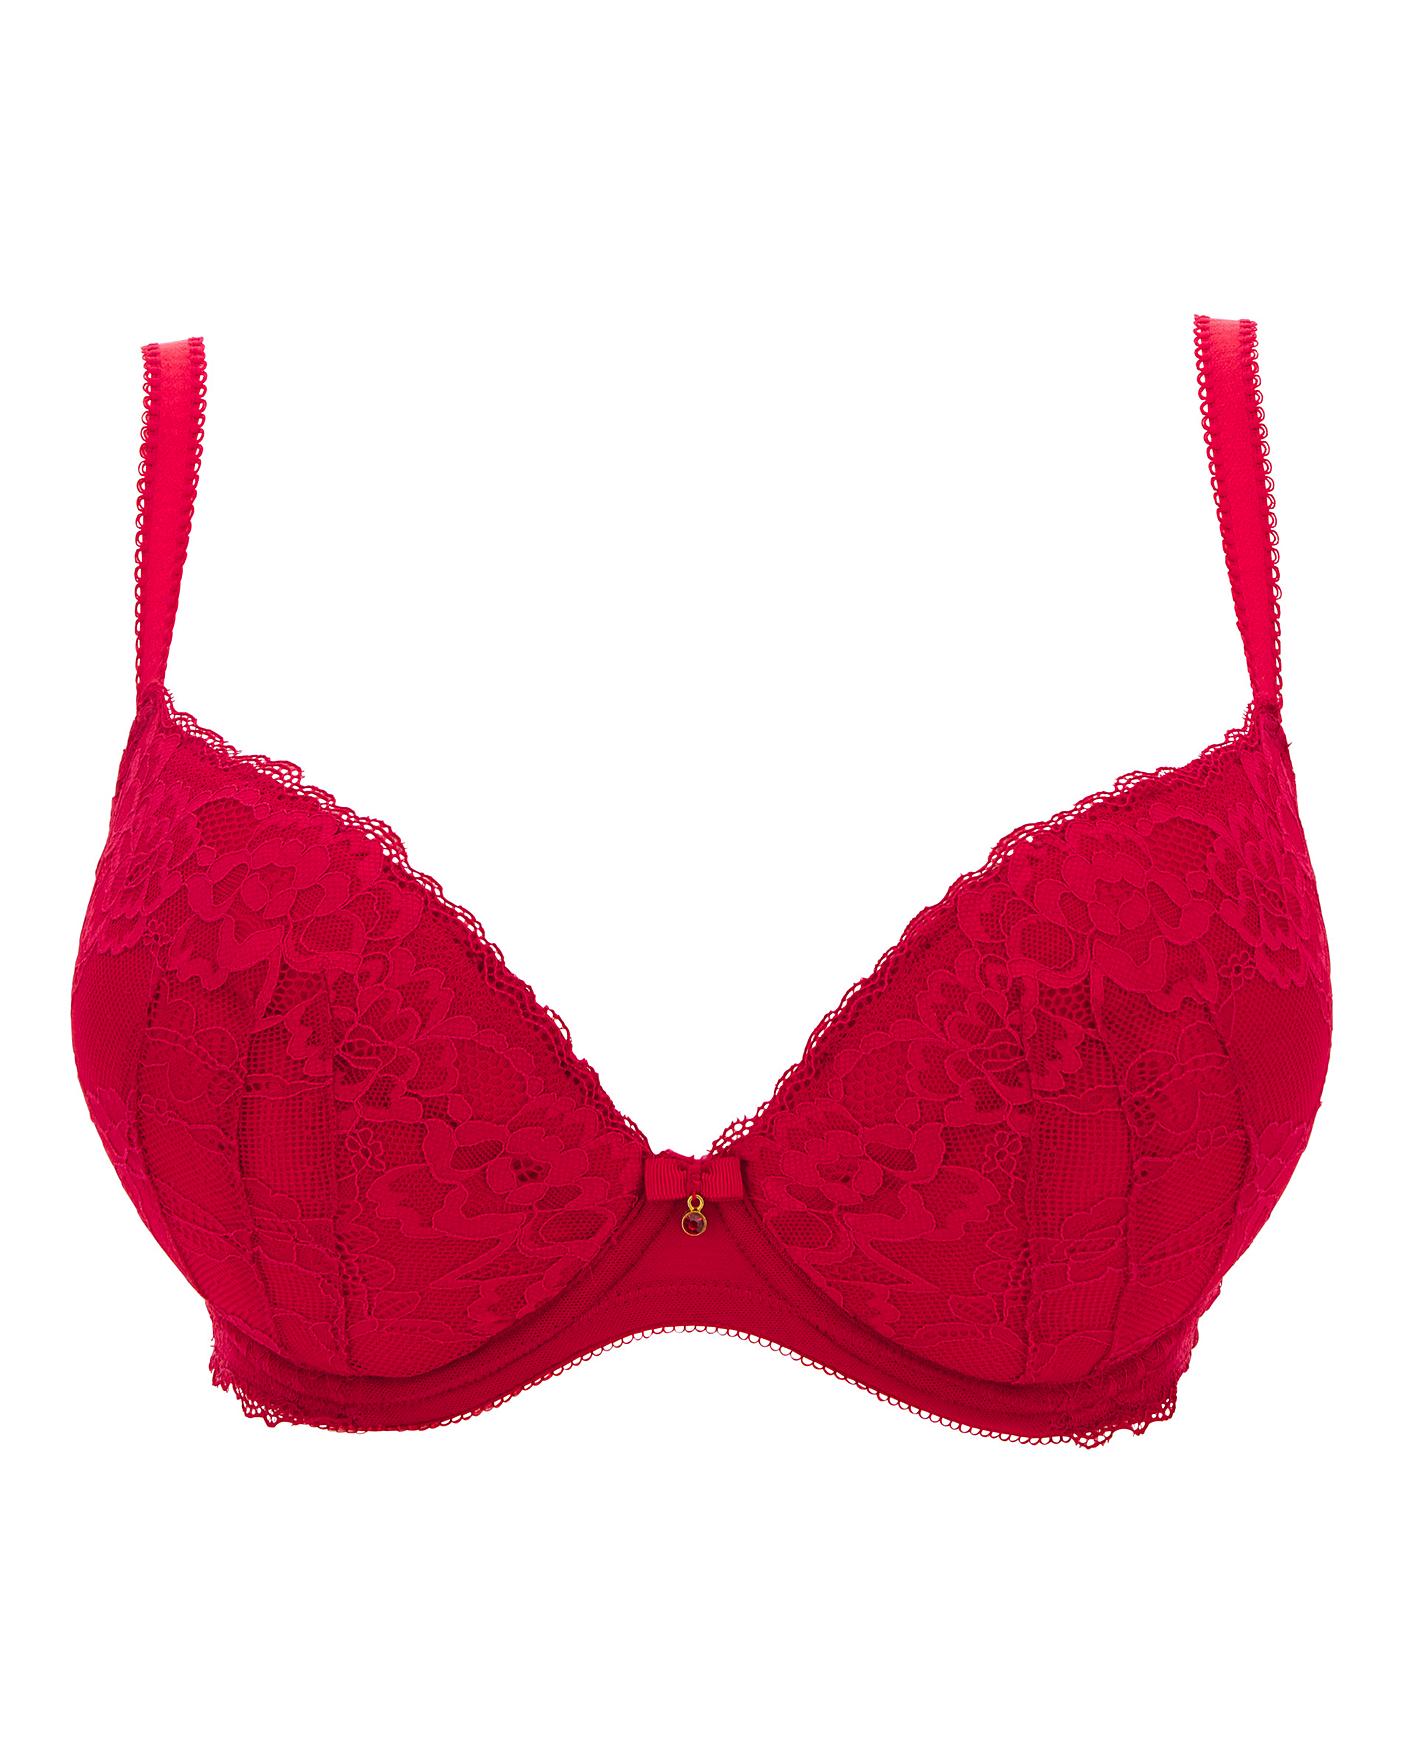 Ann Summers Sexy Lace Plunge Bra | J D Williams